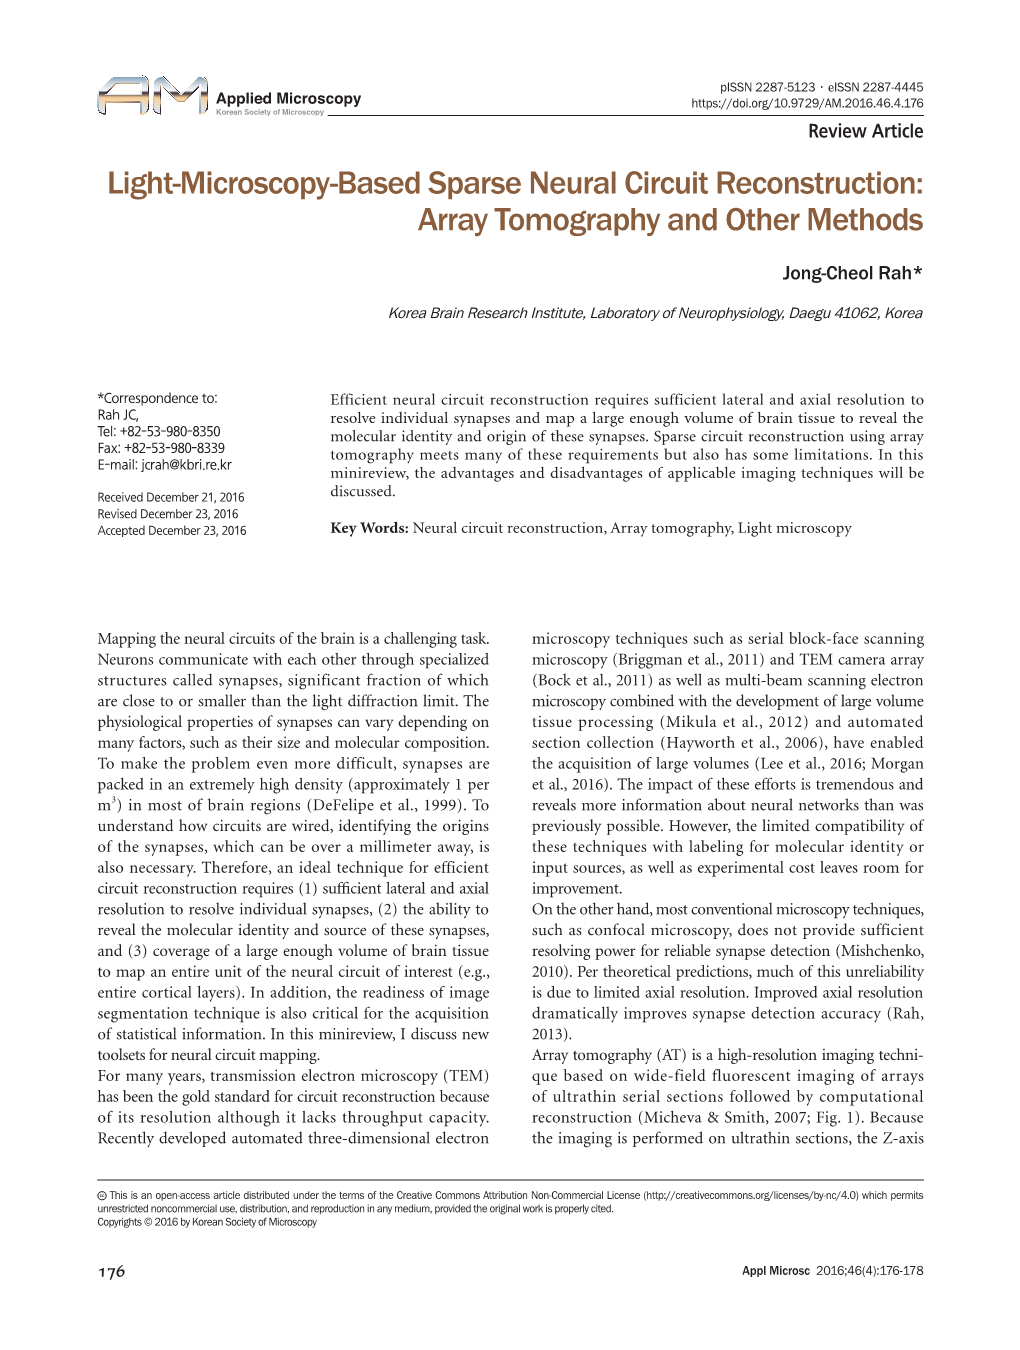 Light-Microscopy-Based Sparse Neural Circuit Reconstruction: Array Tomography and Other Methods